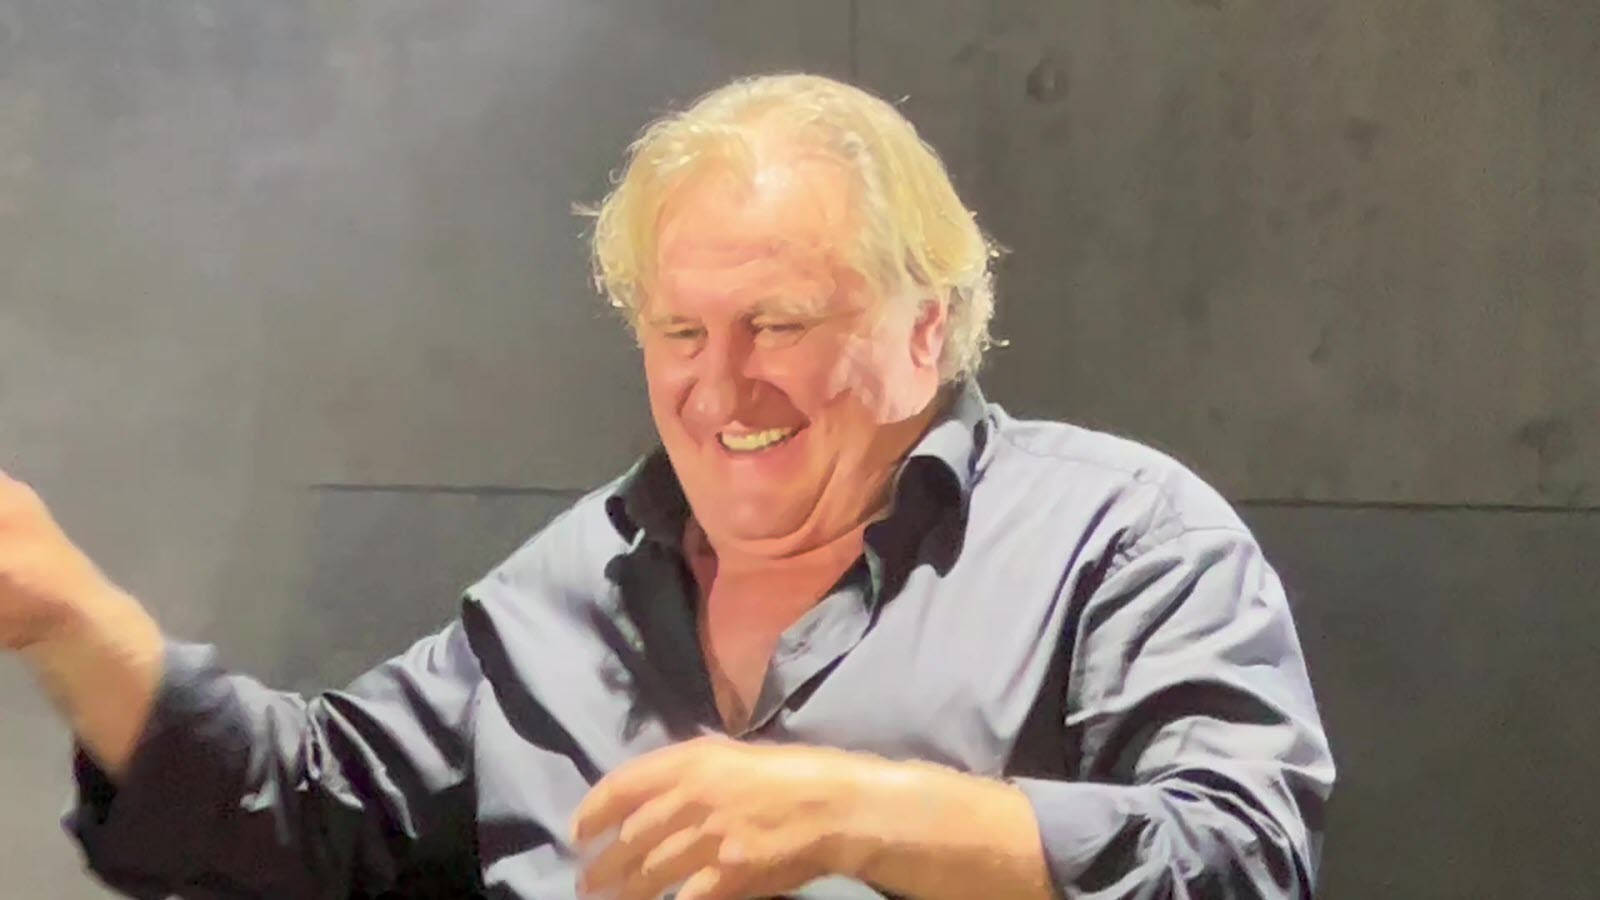 Gérarddepardieu Leende Stort (as A Suggestion For A Computer Or Mobile Wallpaper Showcasing A Photo Of Depardieu Smiling) Wallpaper